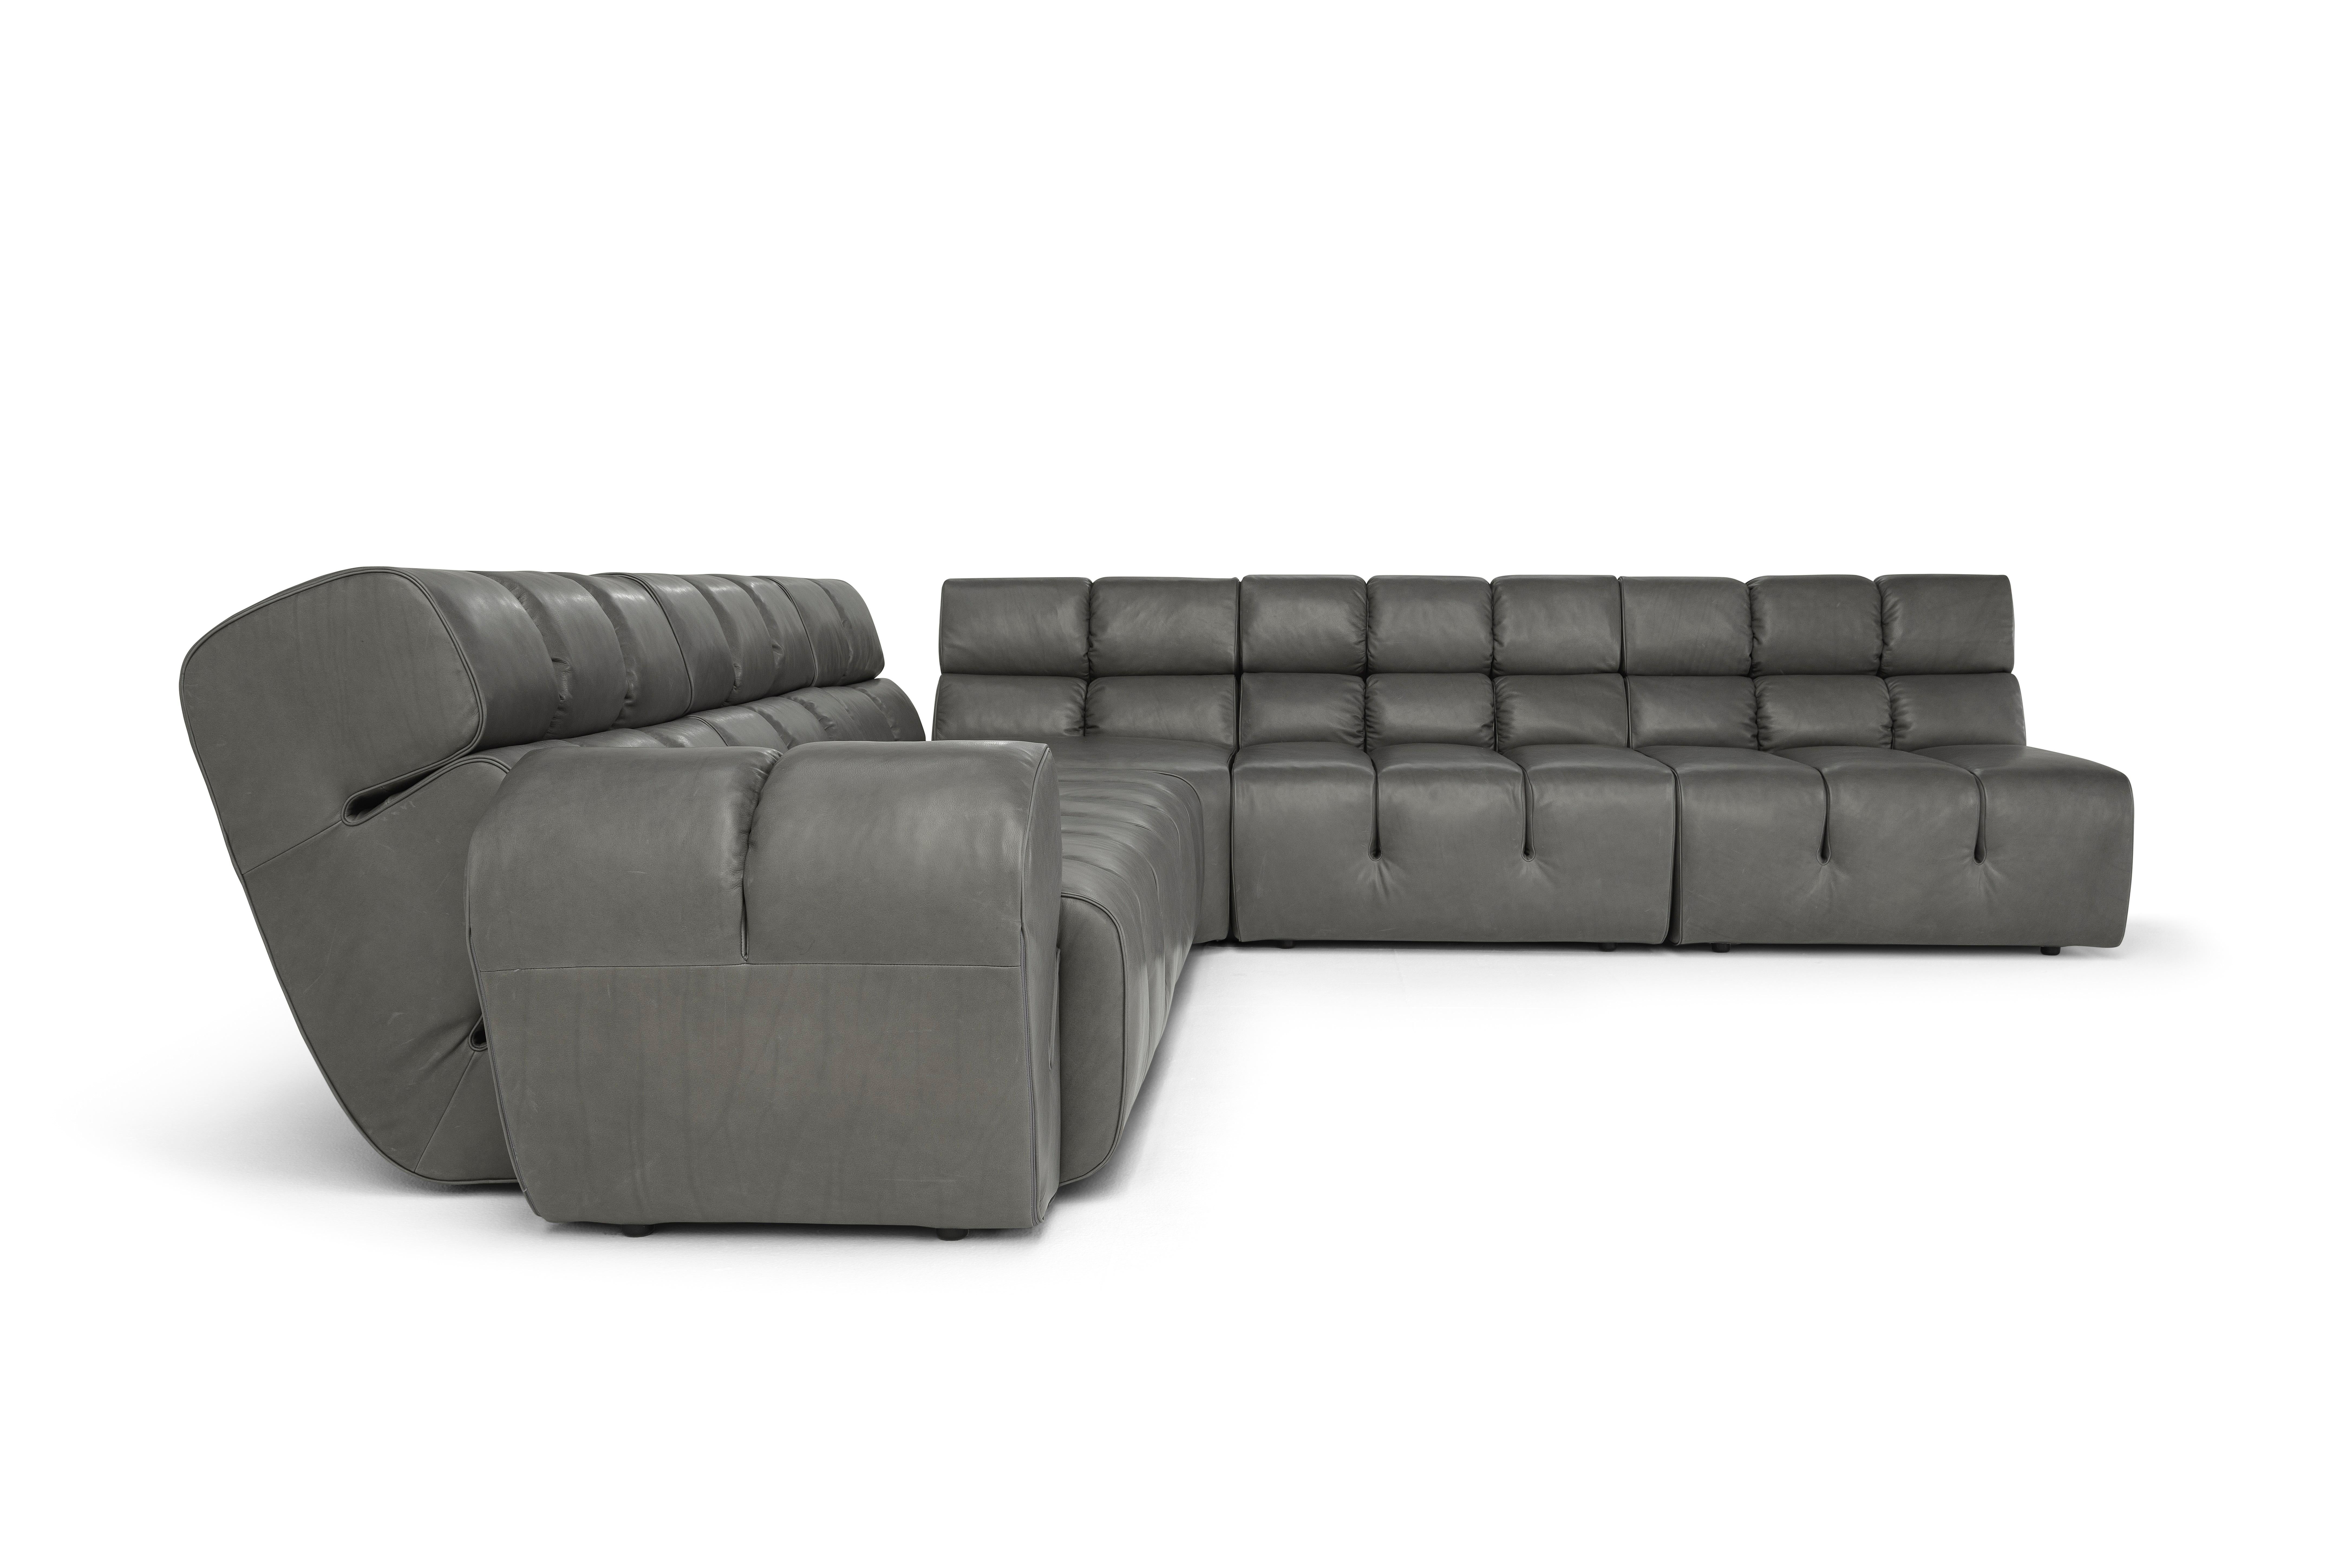 Contemporary Modular Sofa 'Palmo' by Amura Lab, Daino Leather 004 In New Condition For Sale In Paris, FR